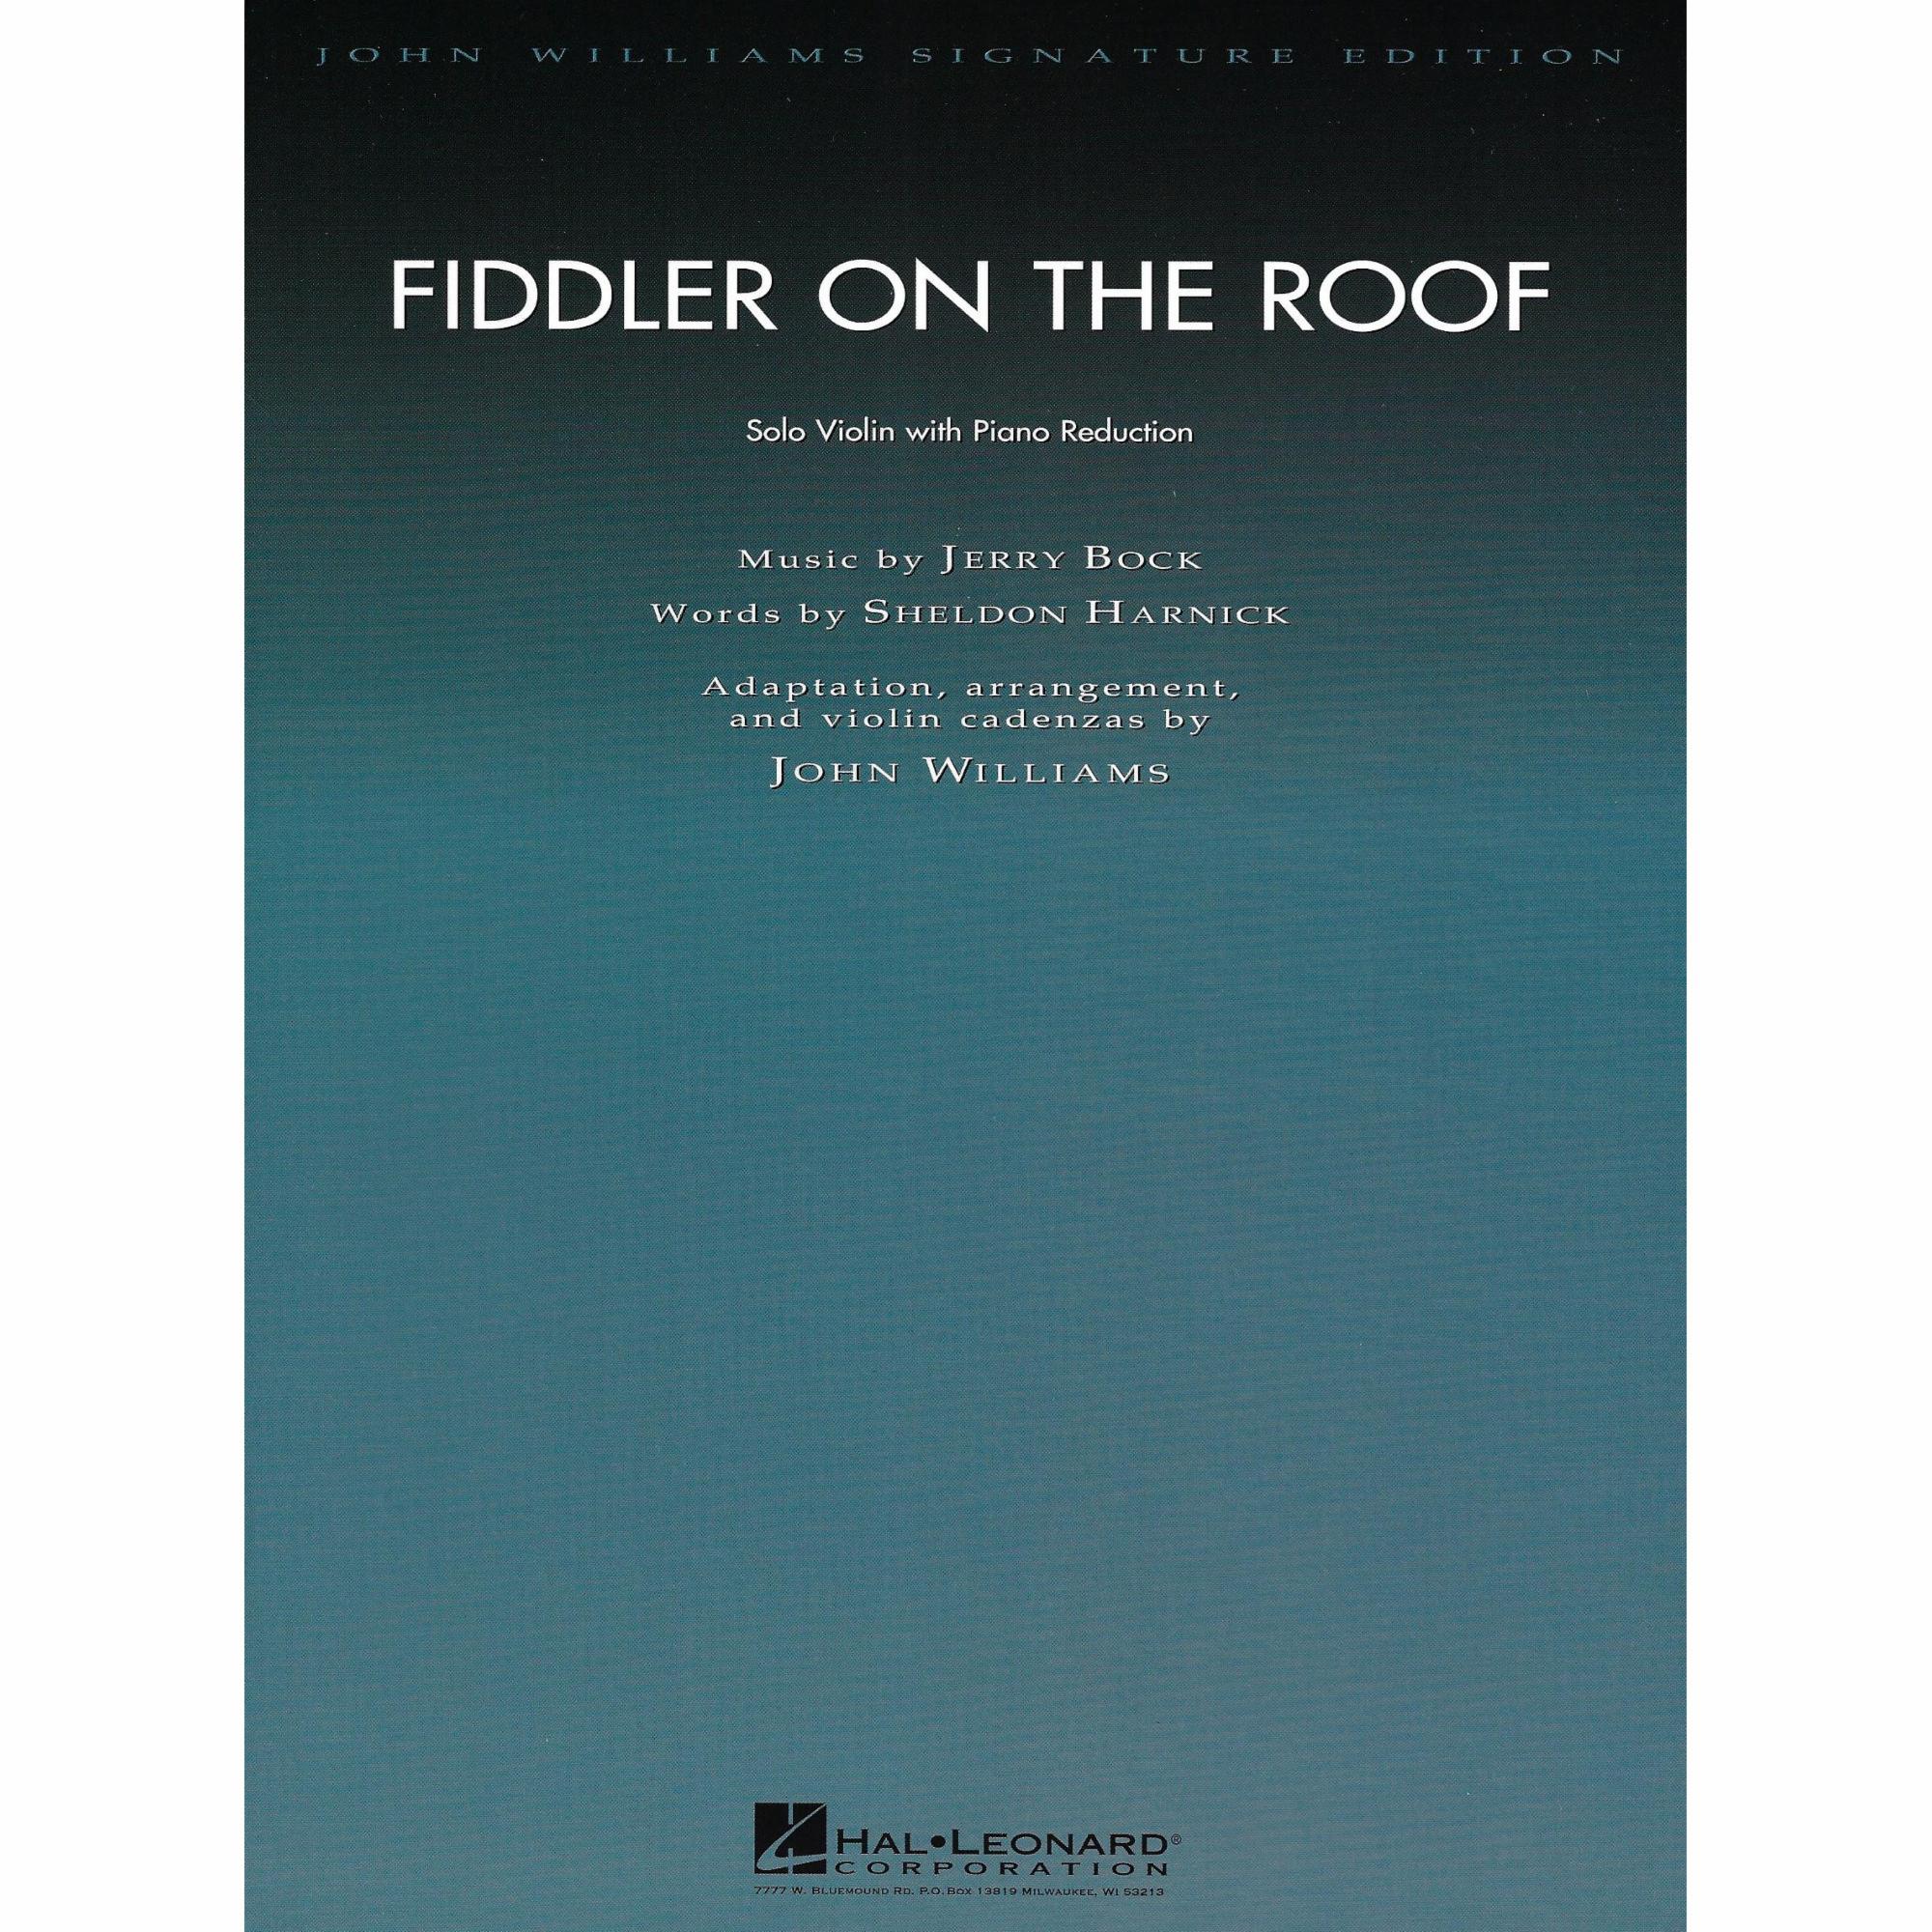 Fiddler on the Roof for Violin and Piano